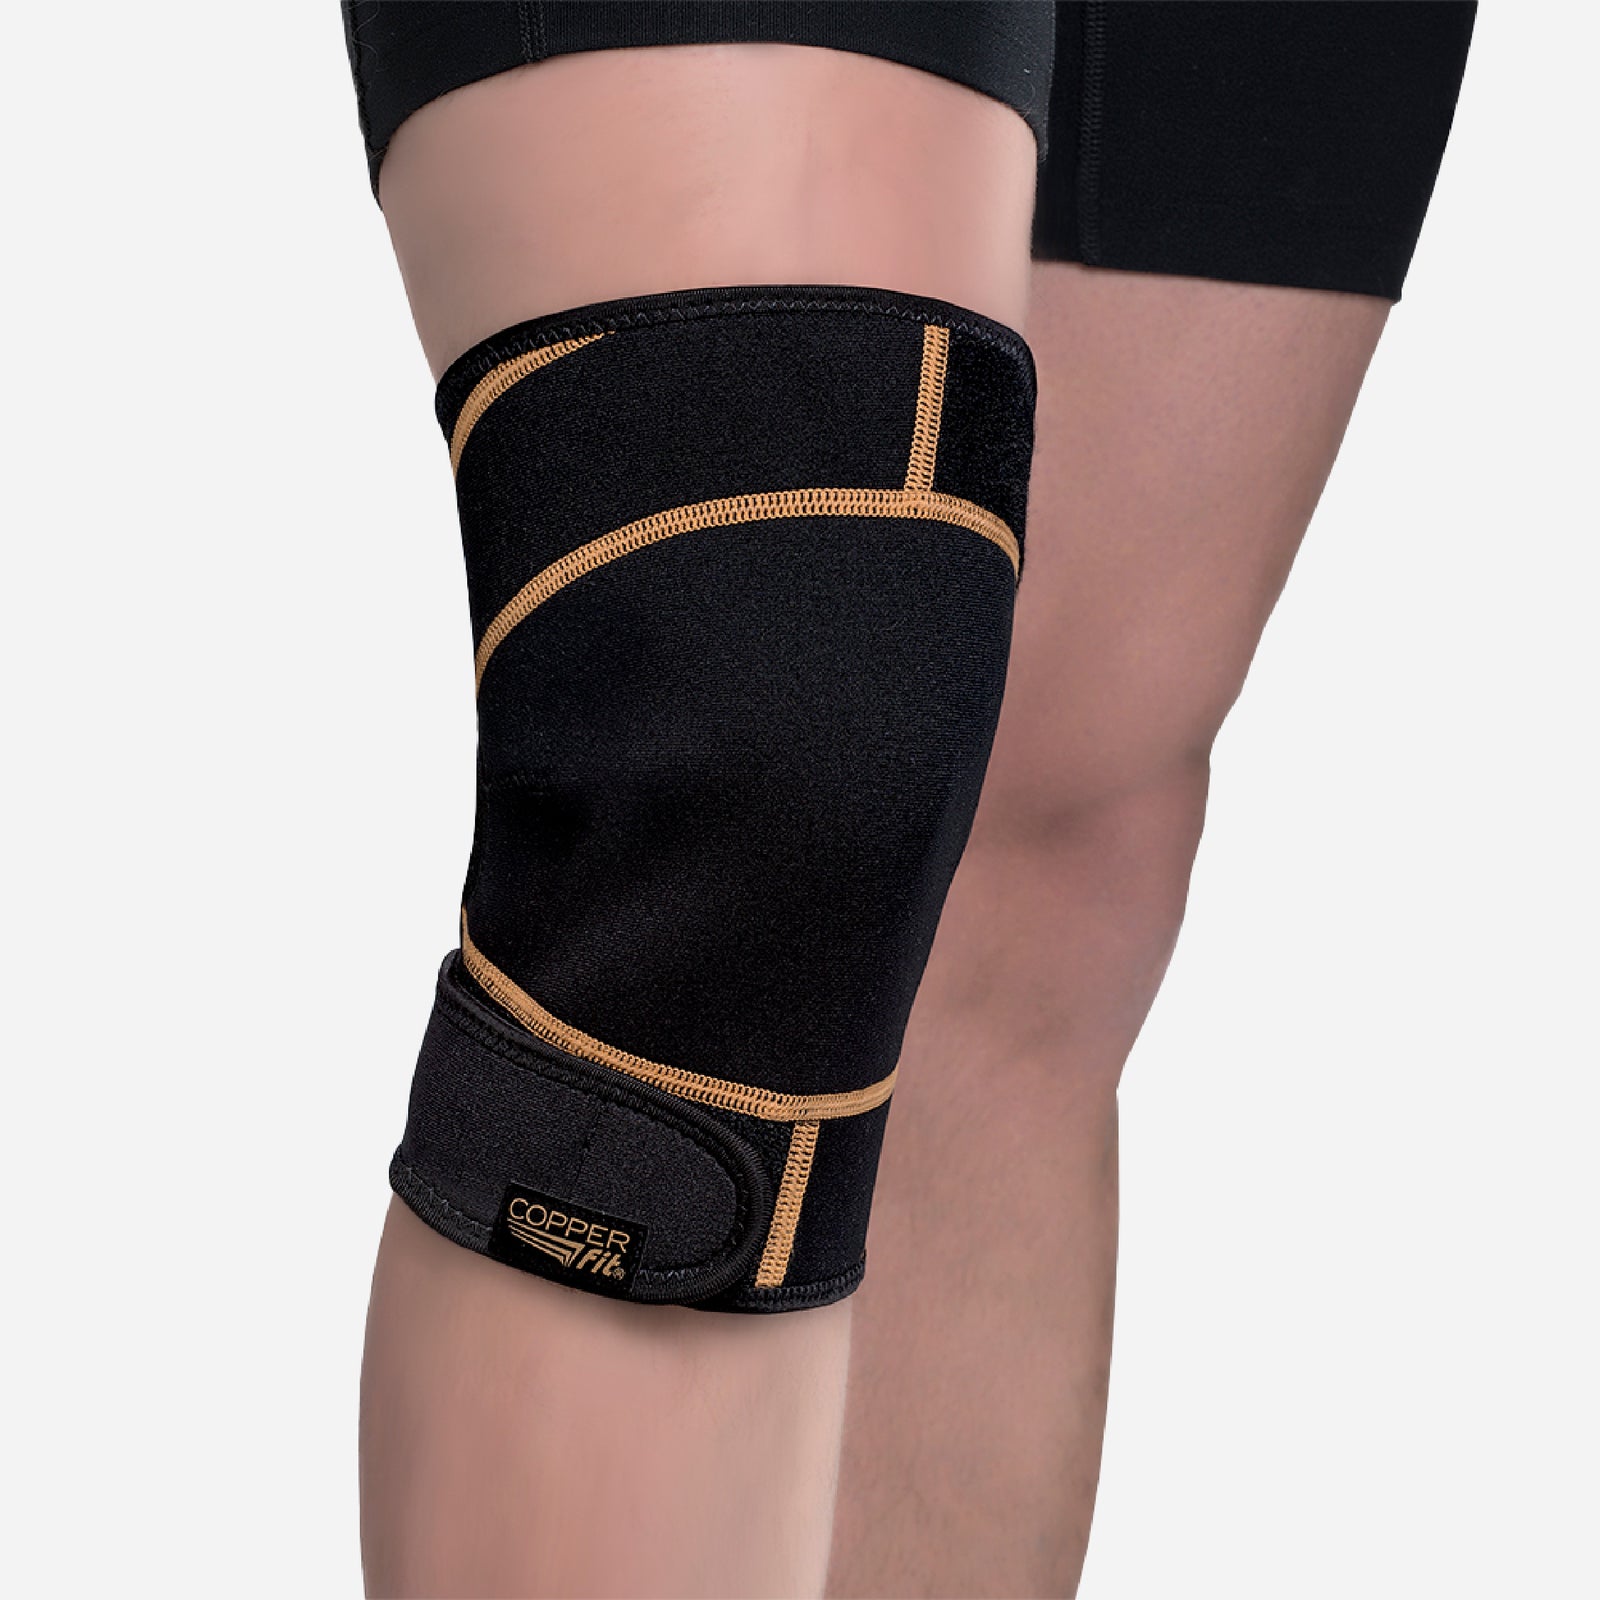 Heelbo Knee Brace Compression Sleeve with Copper Infused Fibers